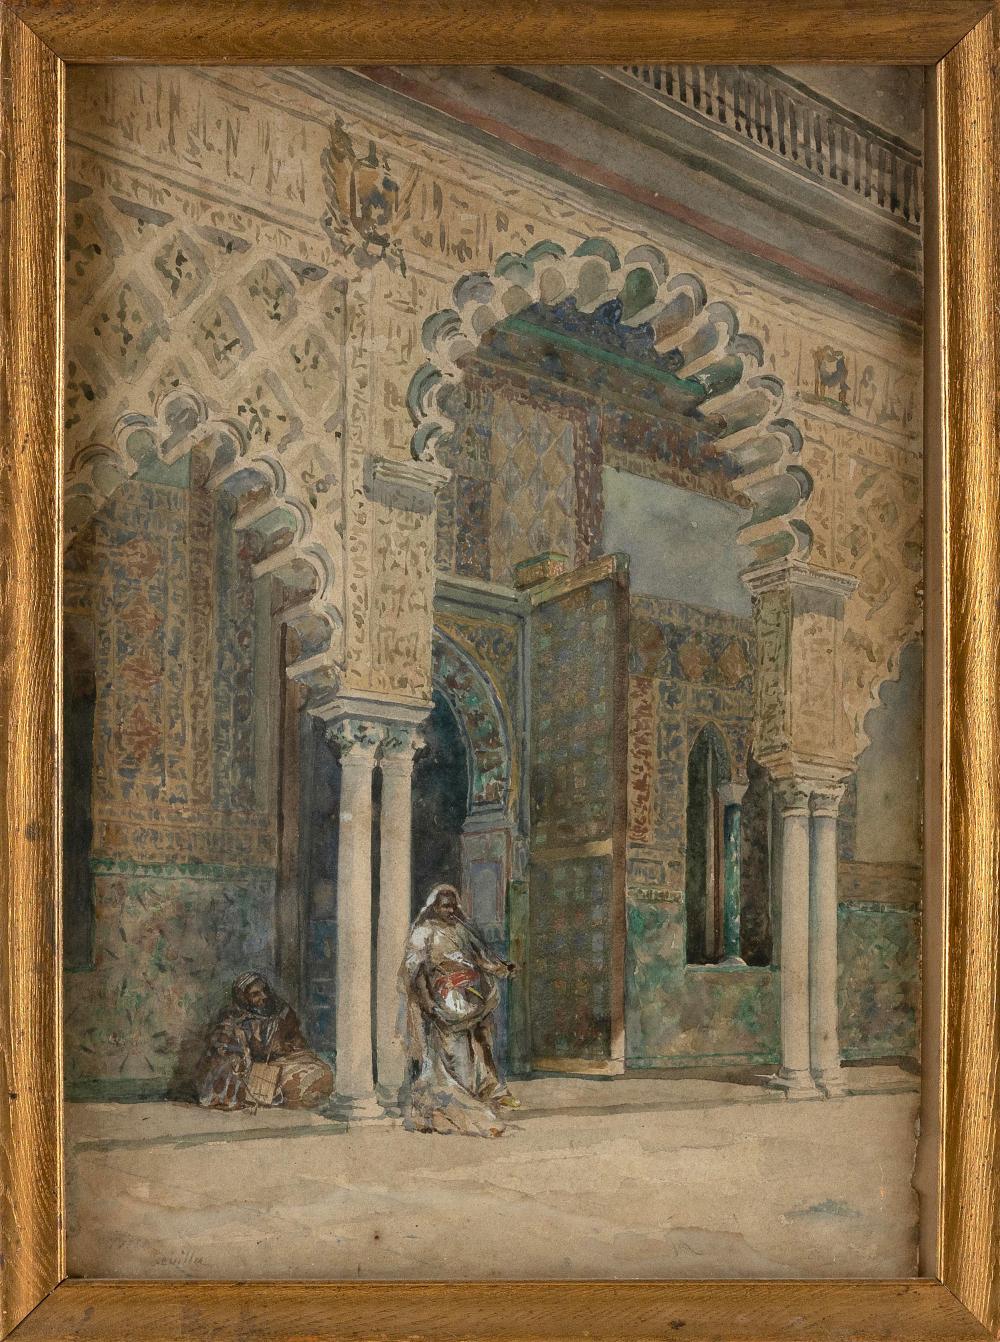 WATERCOLOR DEPICTING FIGURES OUTSIDE